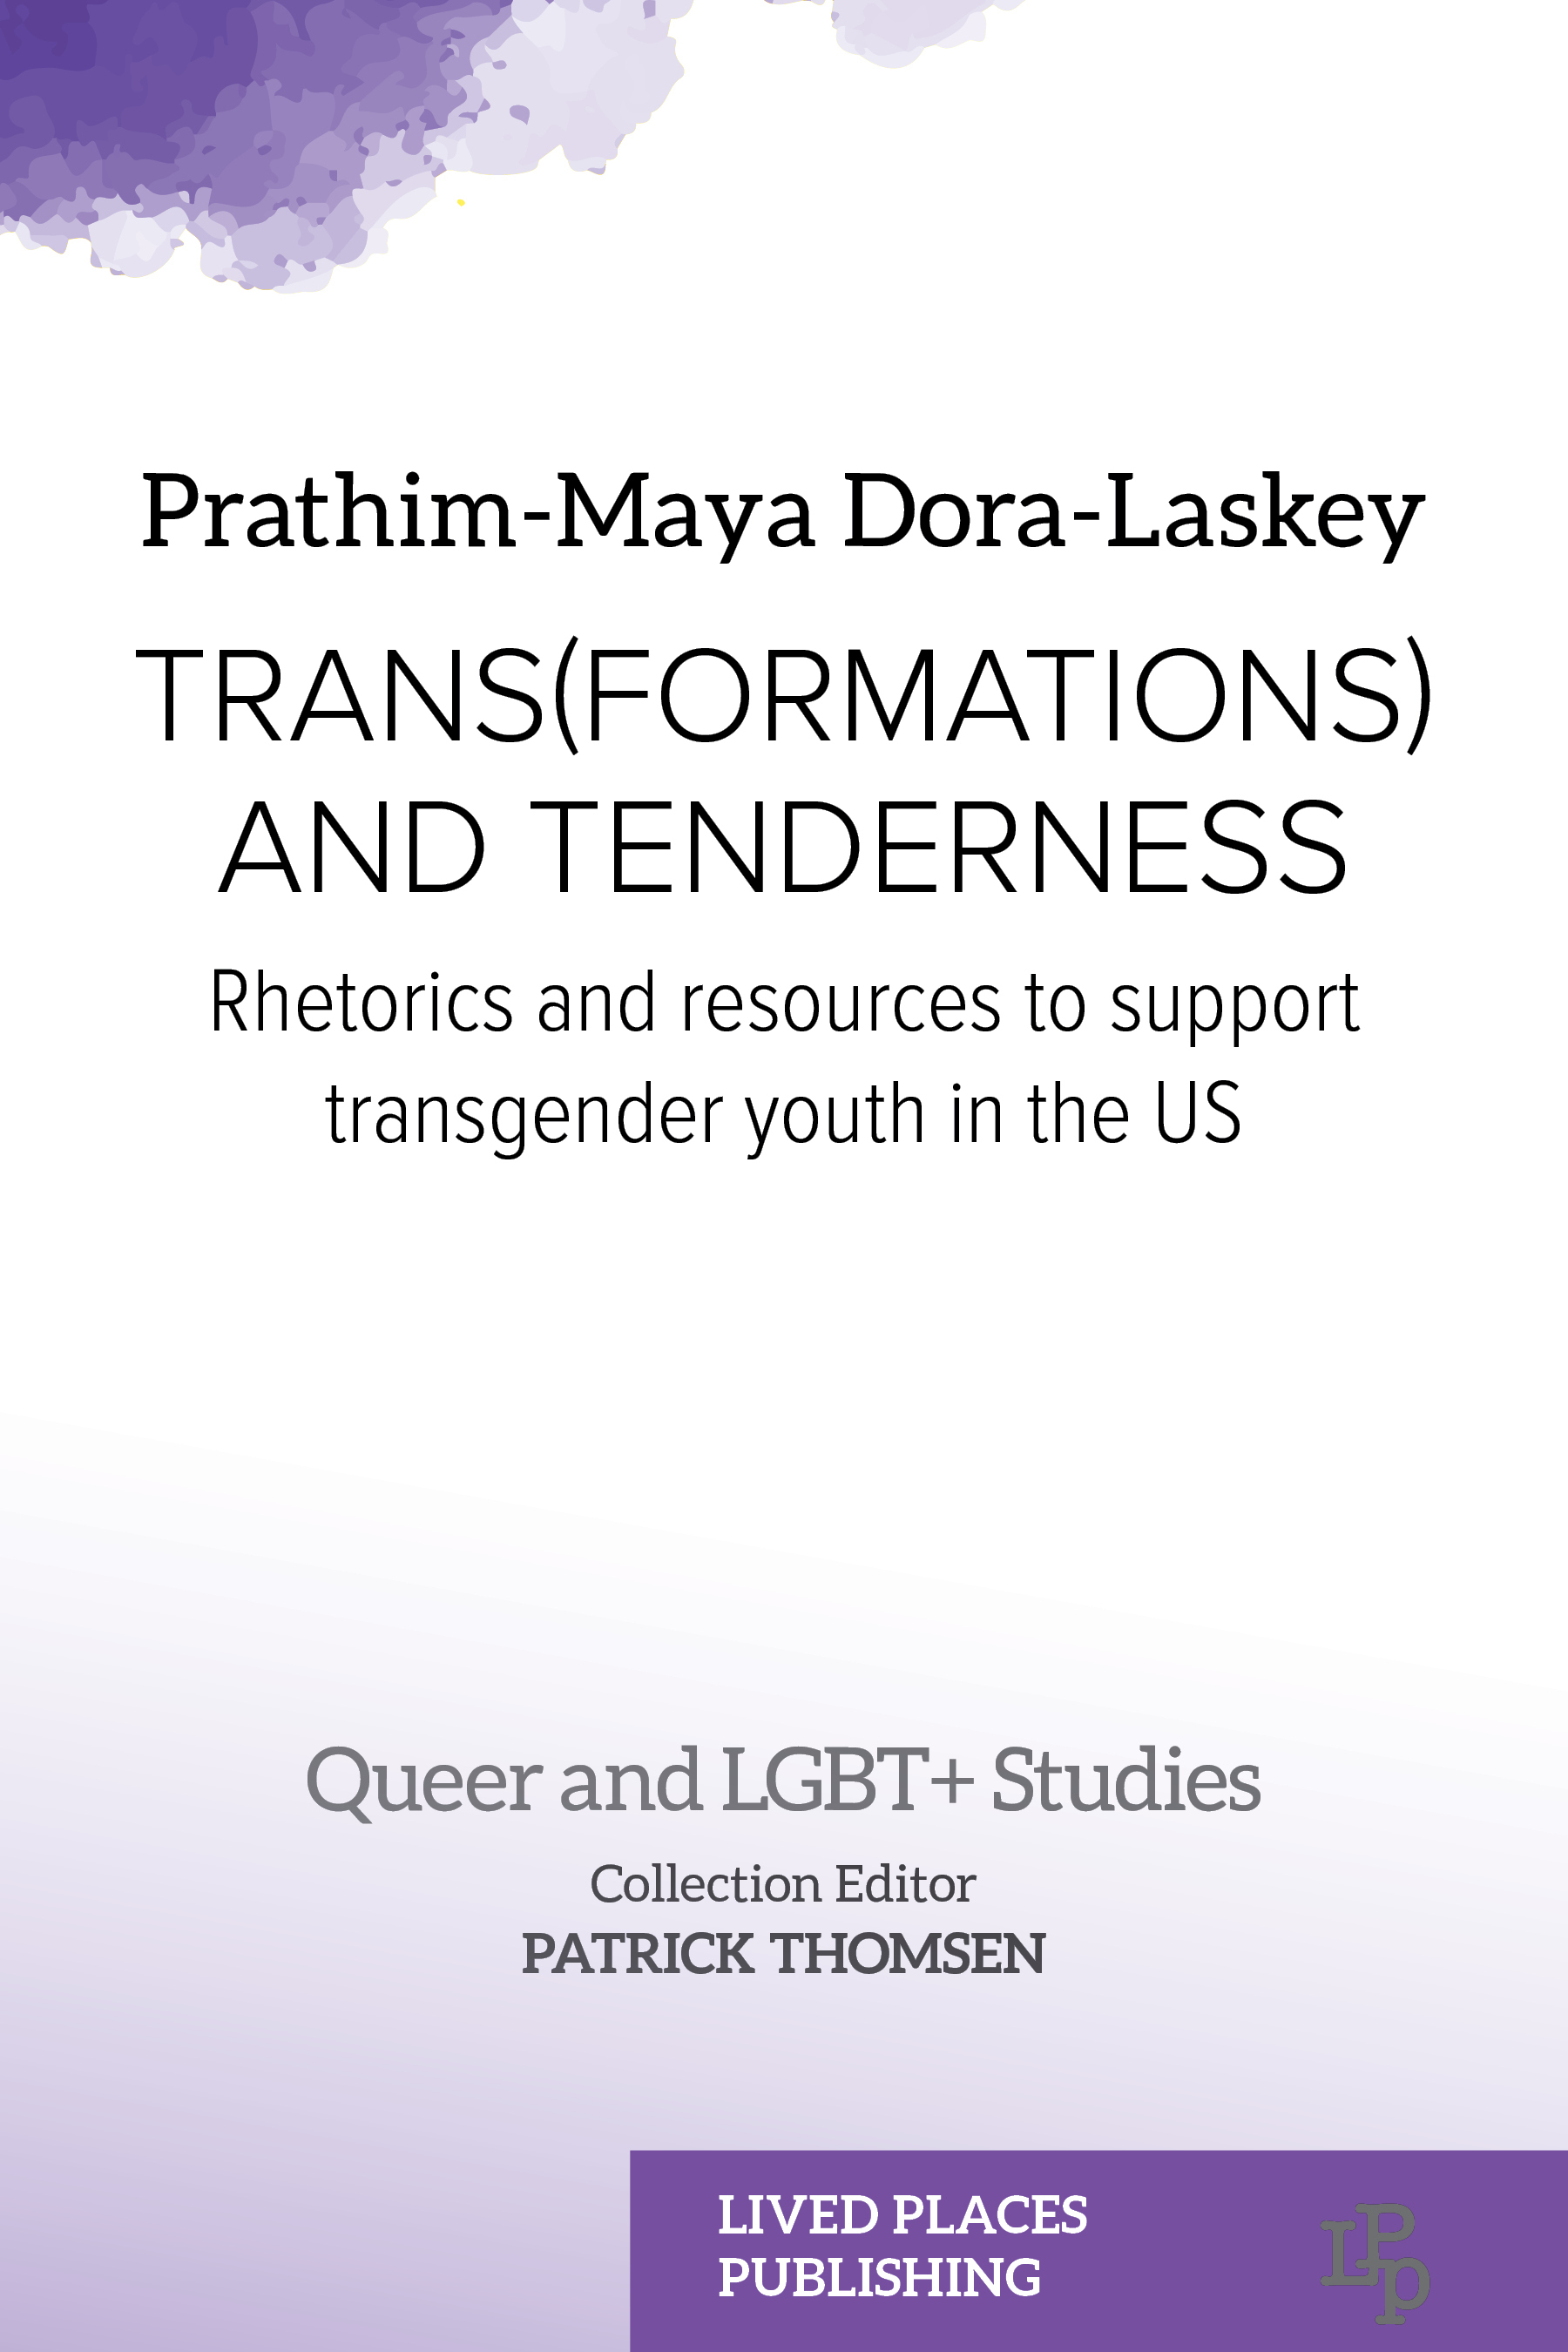 Trans(formations) and Tenderness